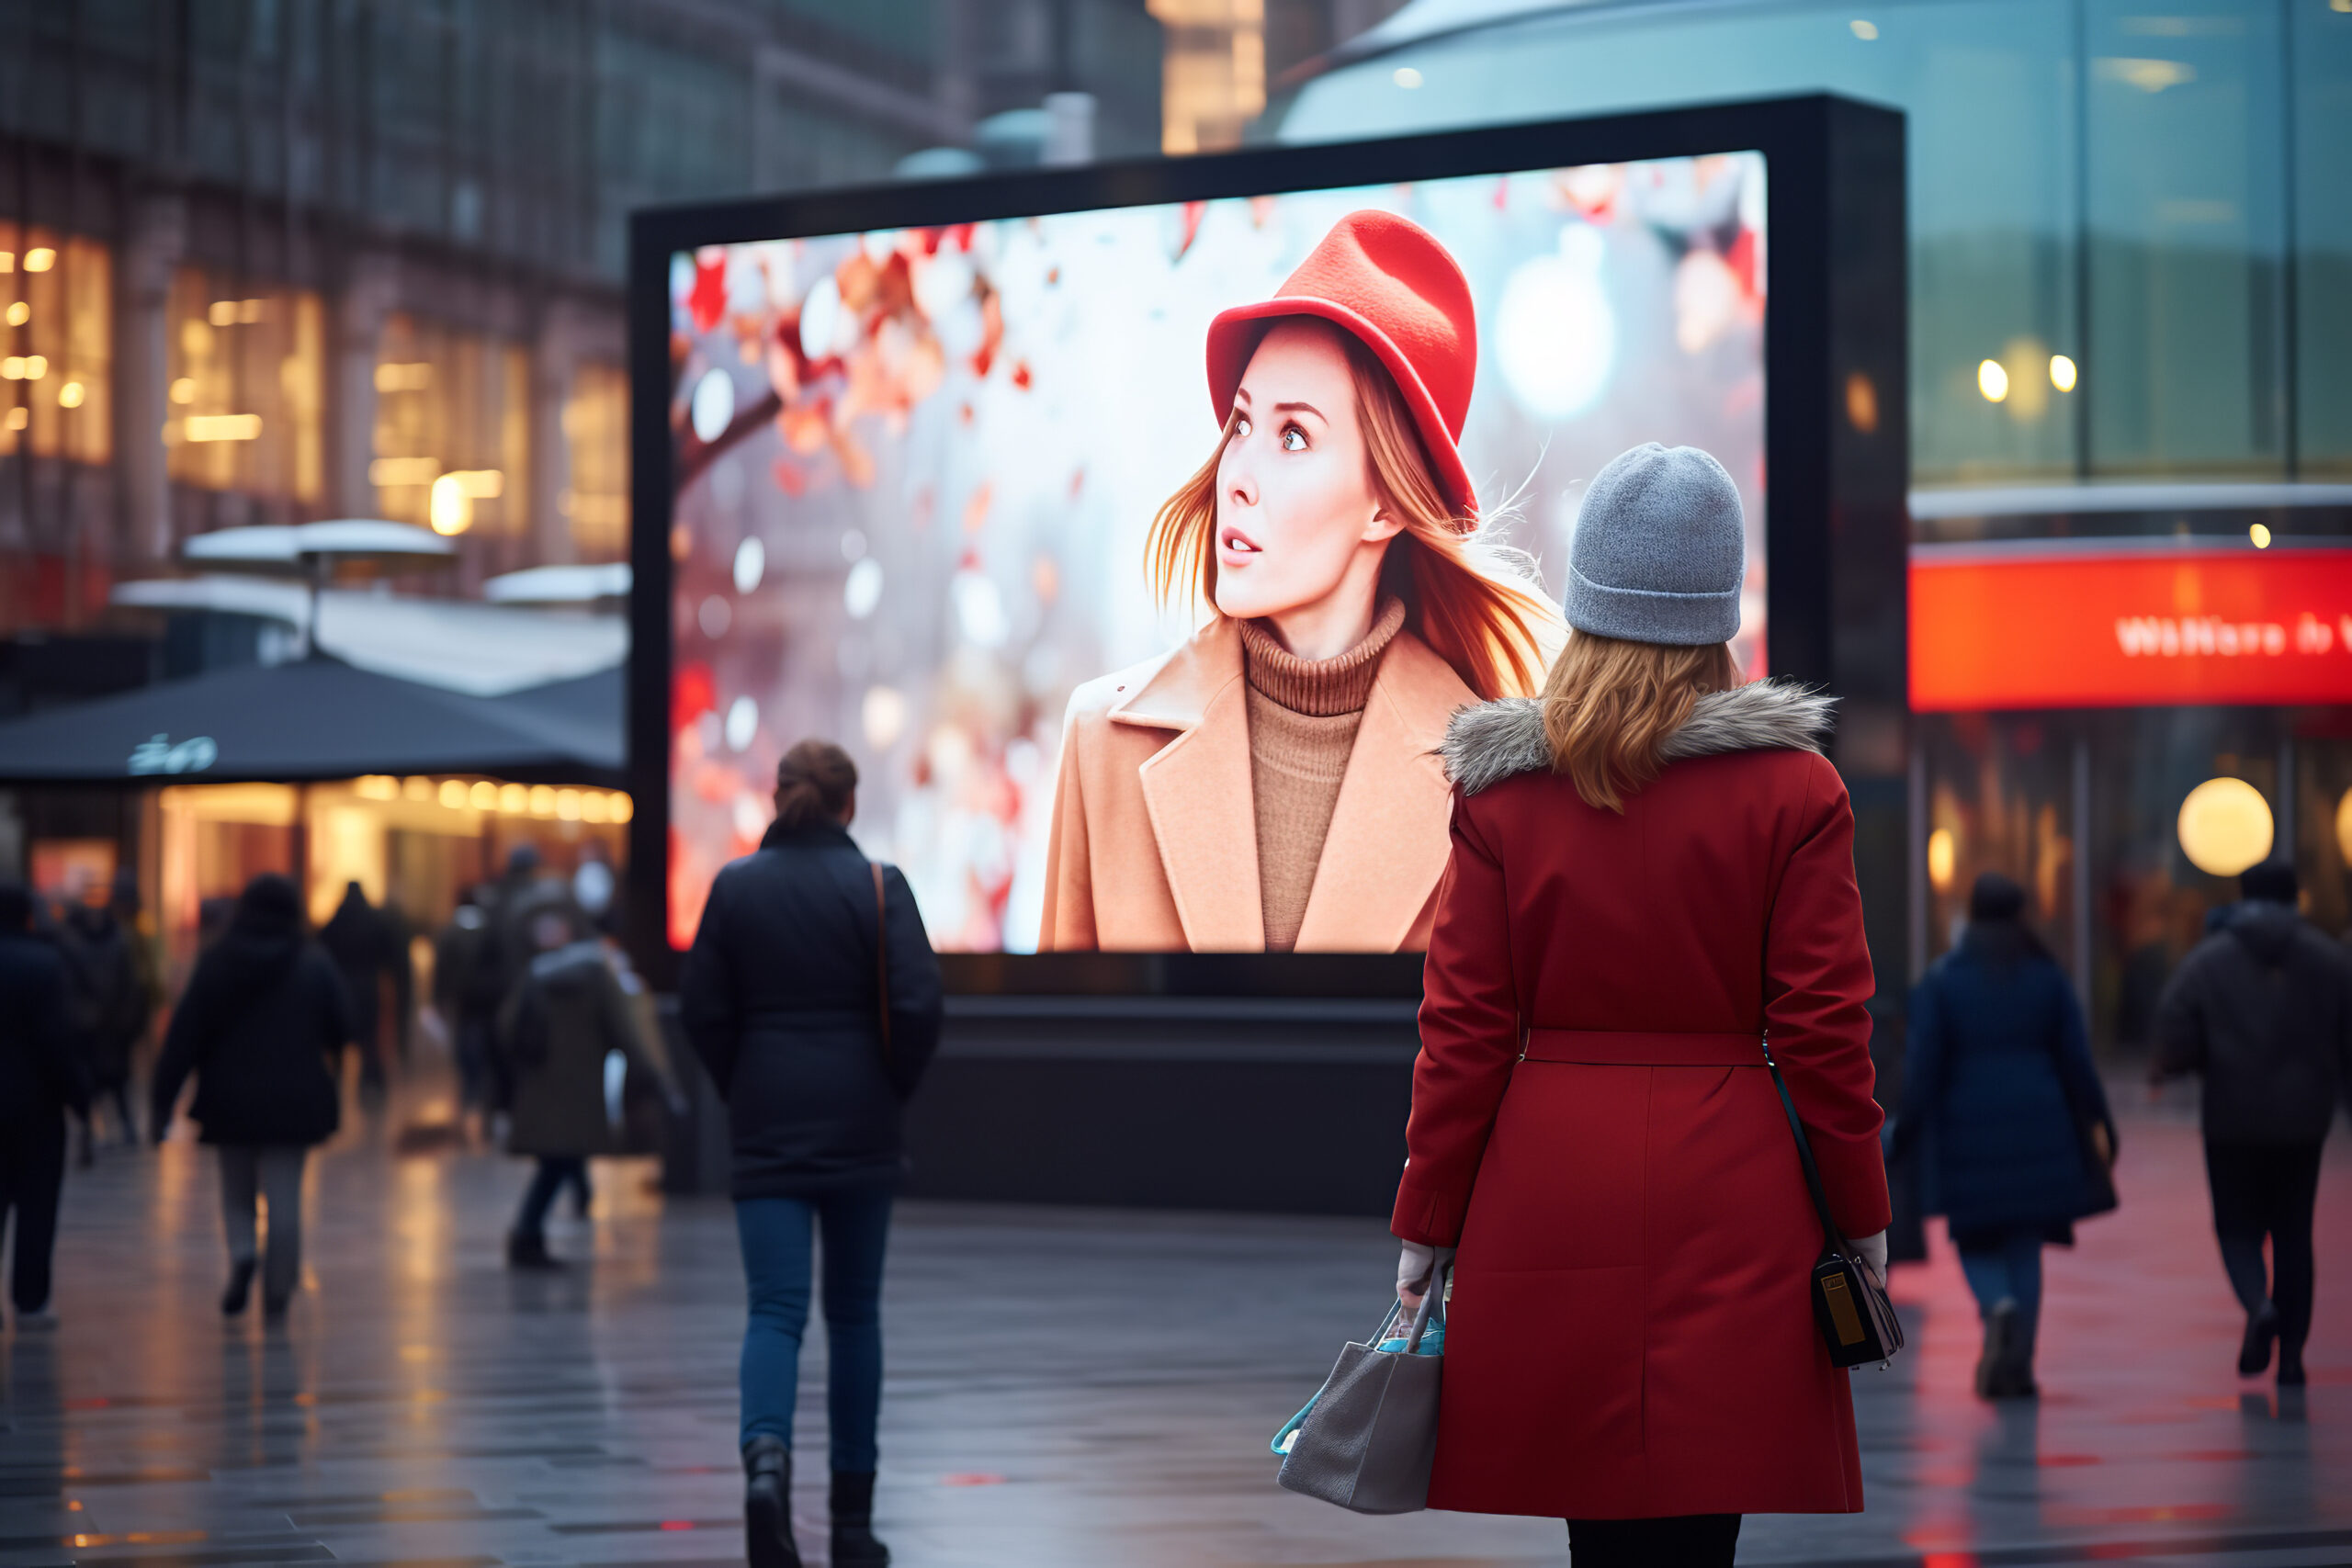 Mix DOOH (Digital Out-Of-Home)